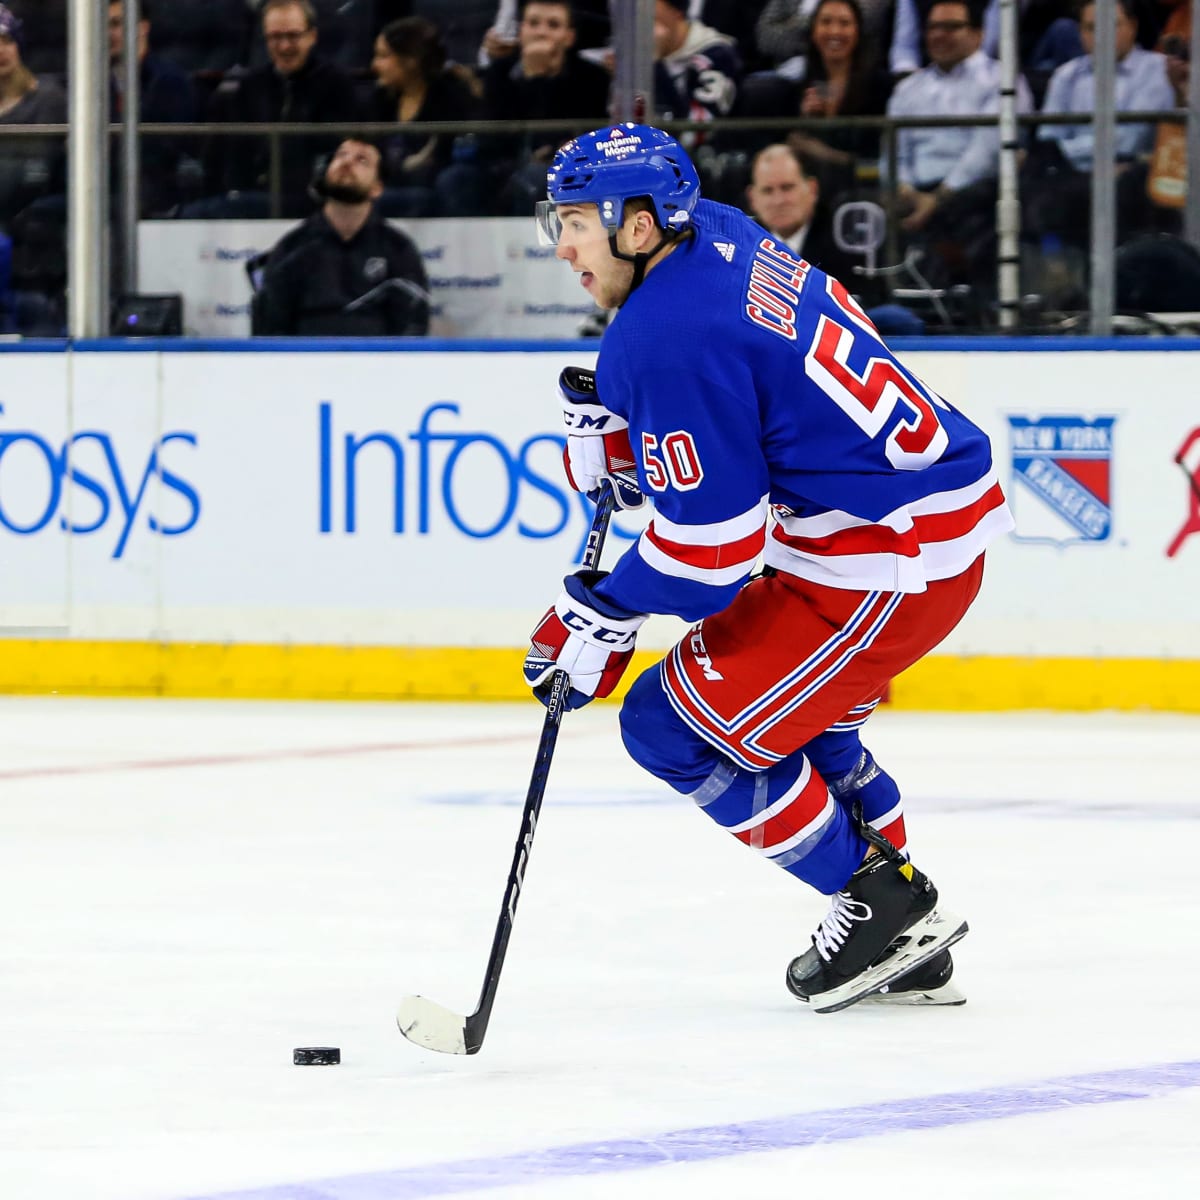 Playoff Takeaways: Rangers' stars step up to solve Schmid, force